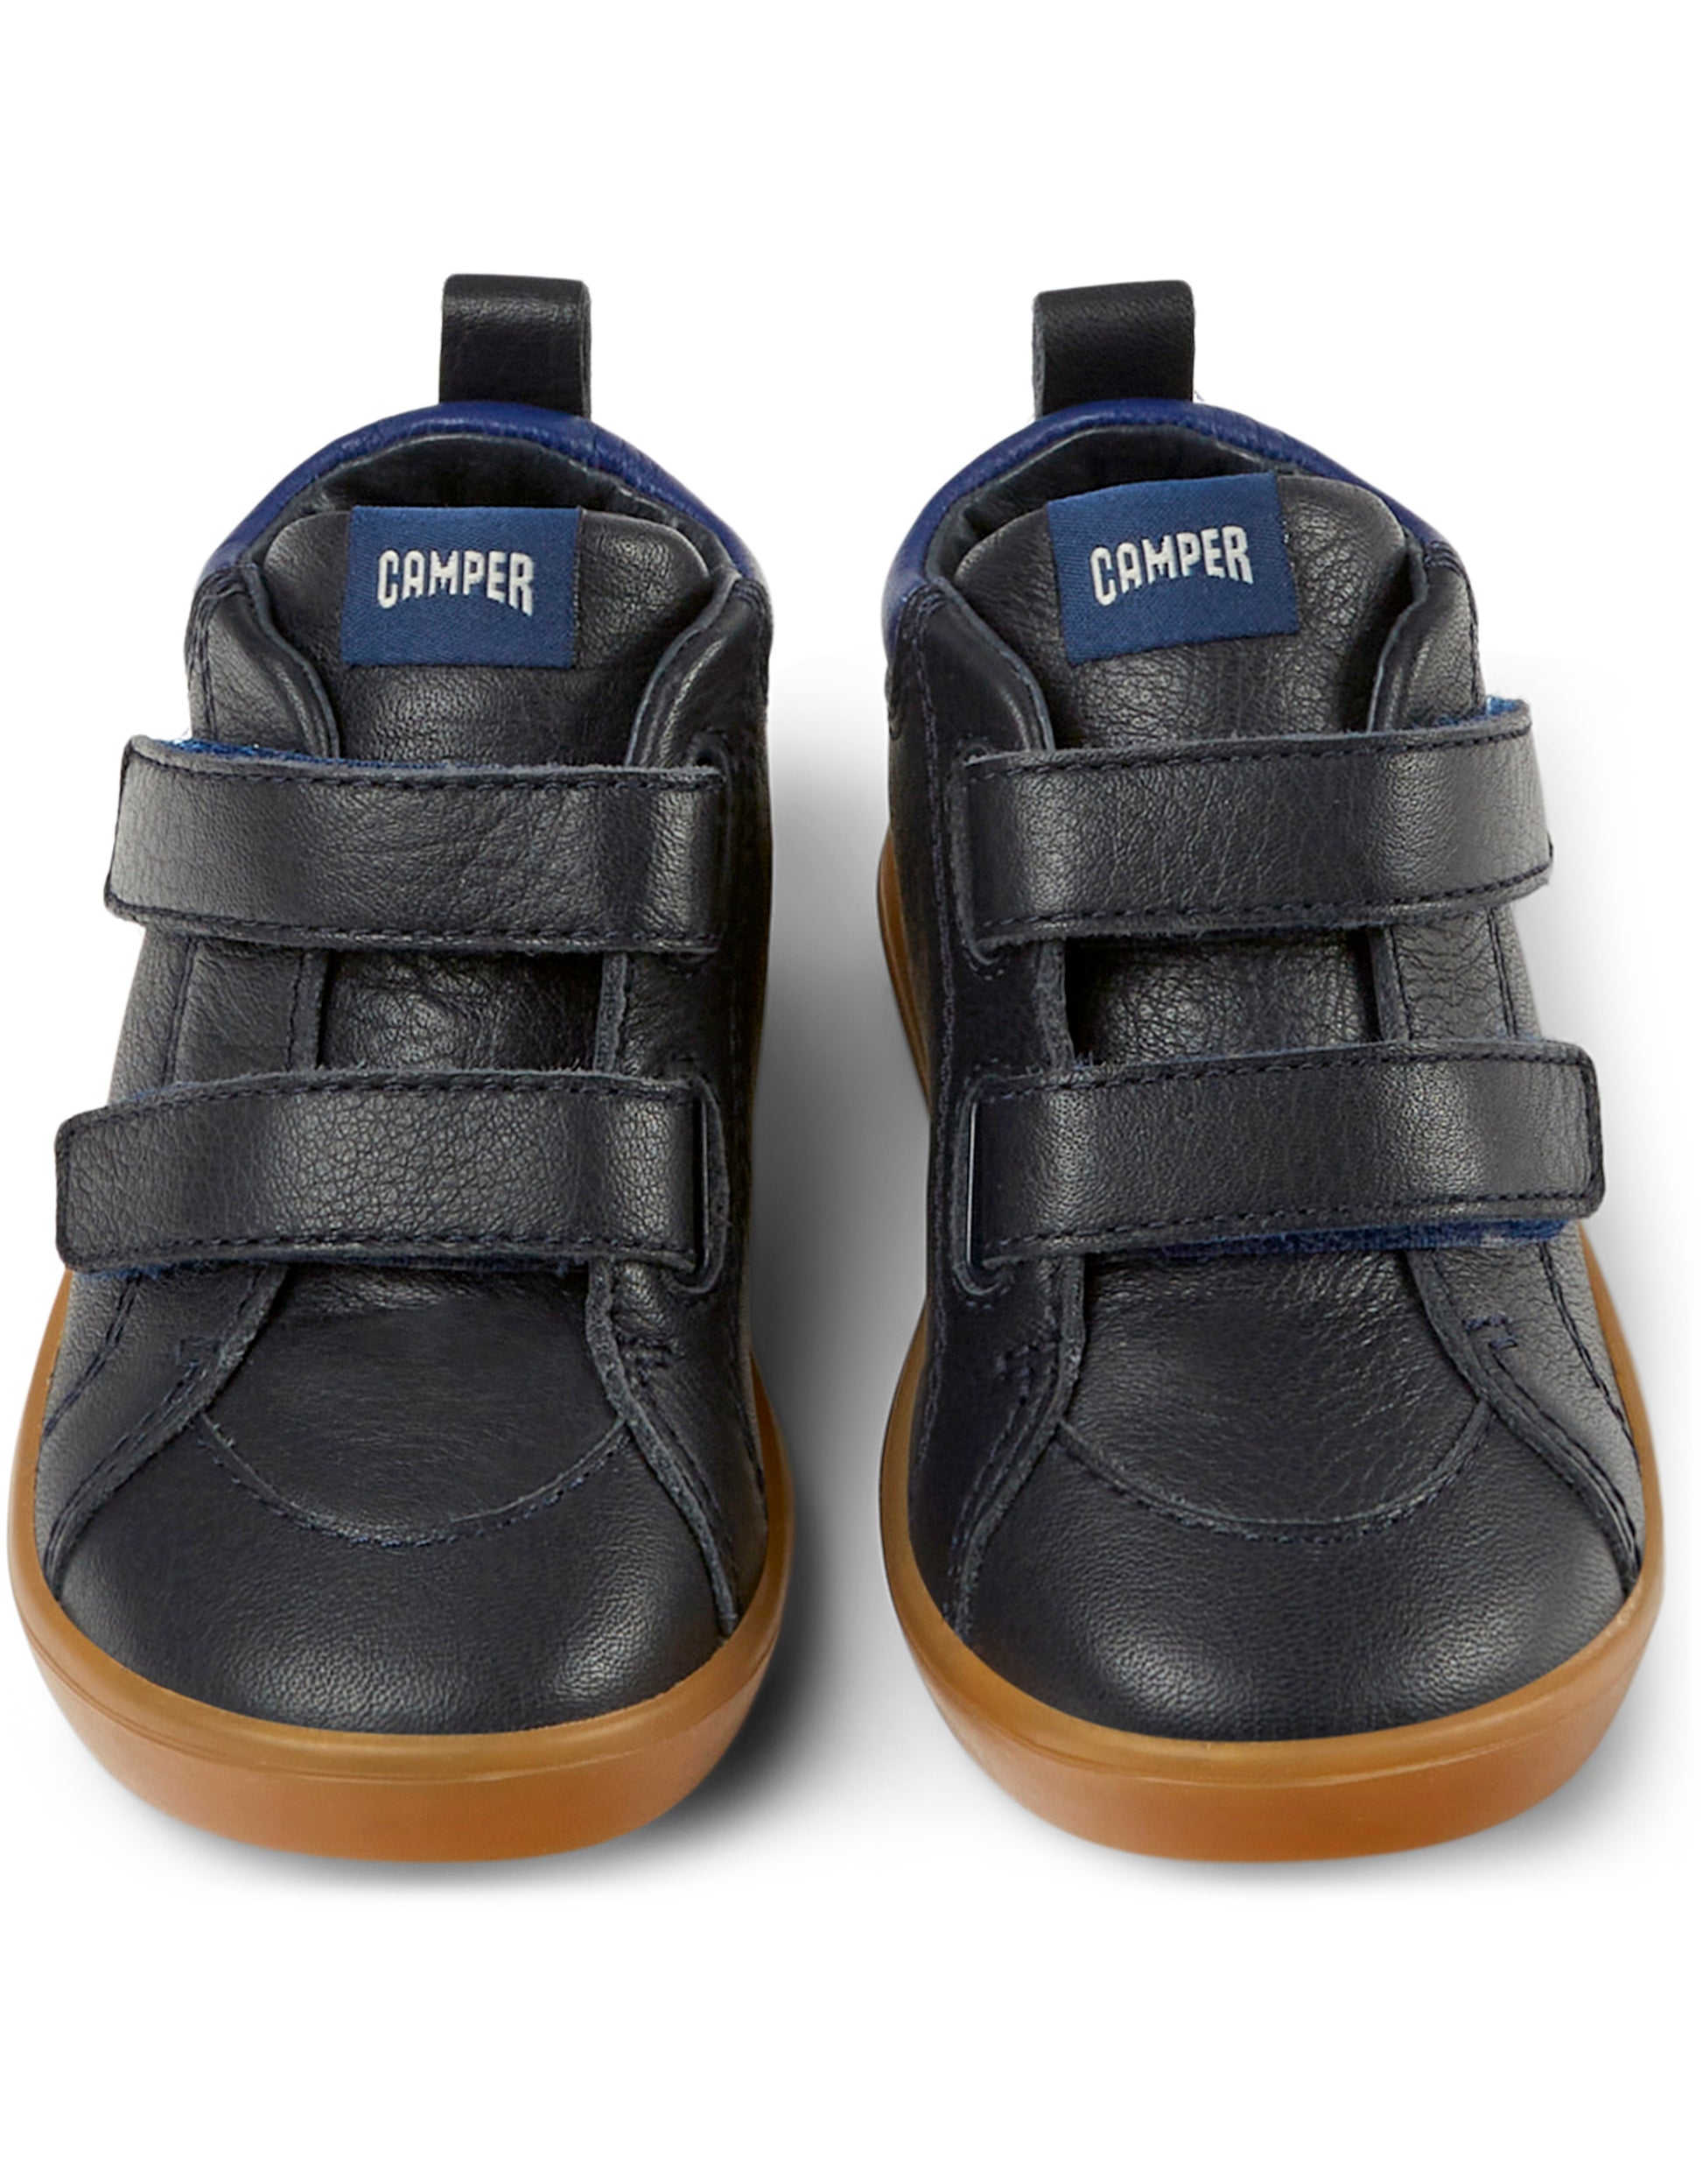 A pair of boys casual ankle boots by Camper, style K900236-013 in navy and blue leather with double velcro fastening. Front view.